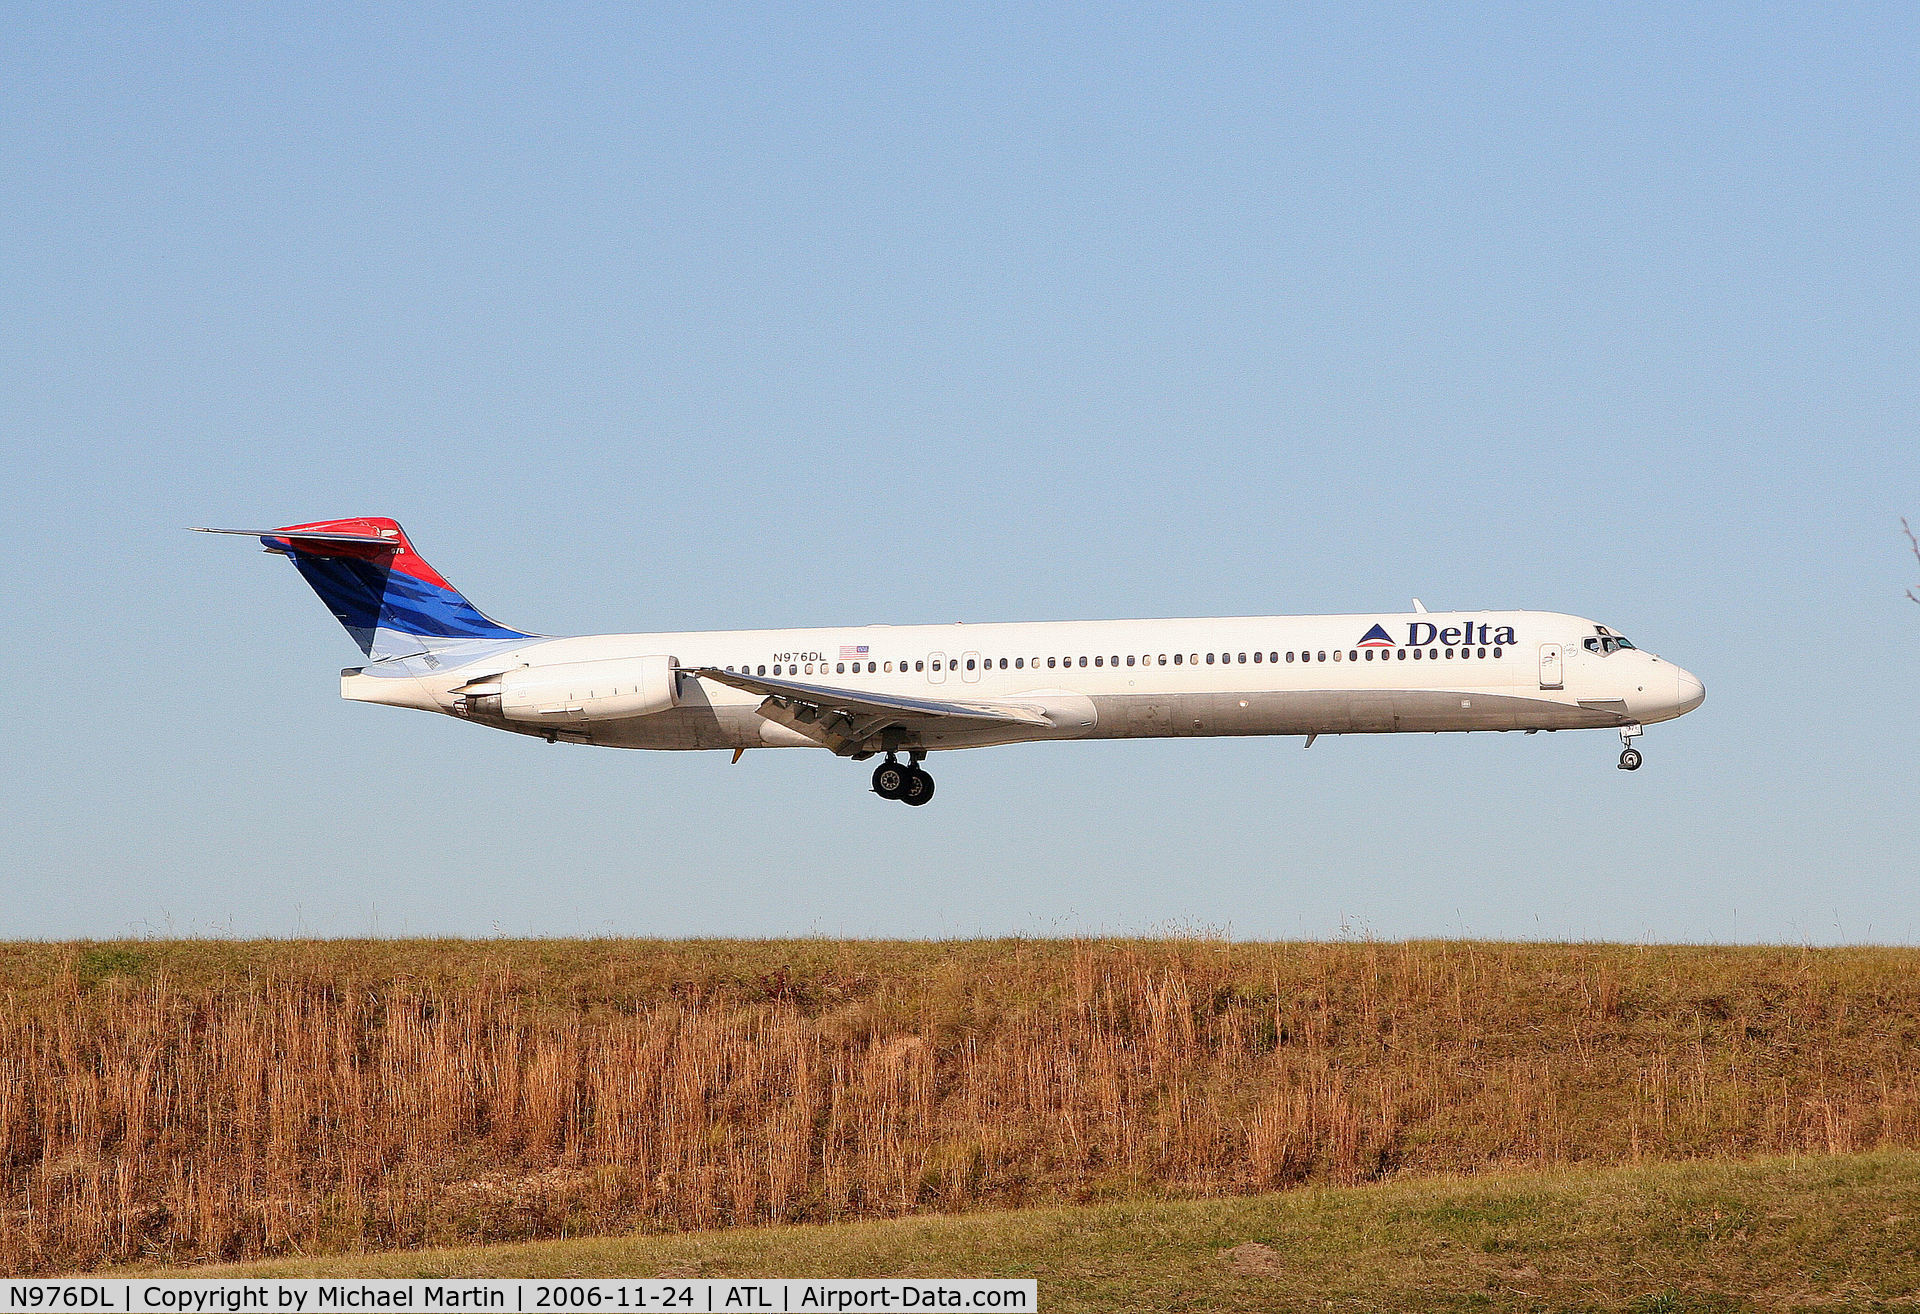 N976DL, 1991 McDonnell Douglas MD-88 C/N 53257, Over the numbers of 9R